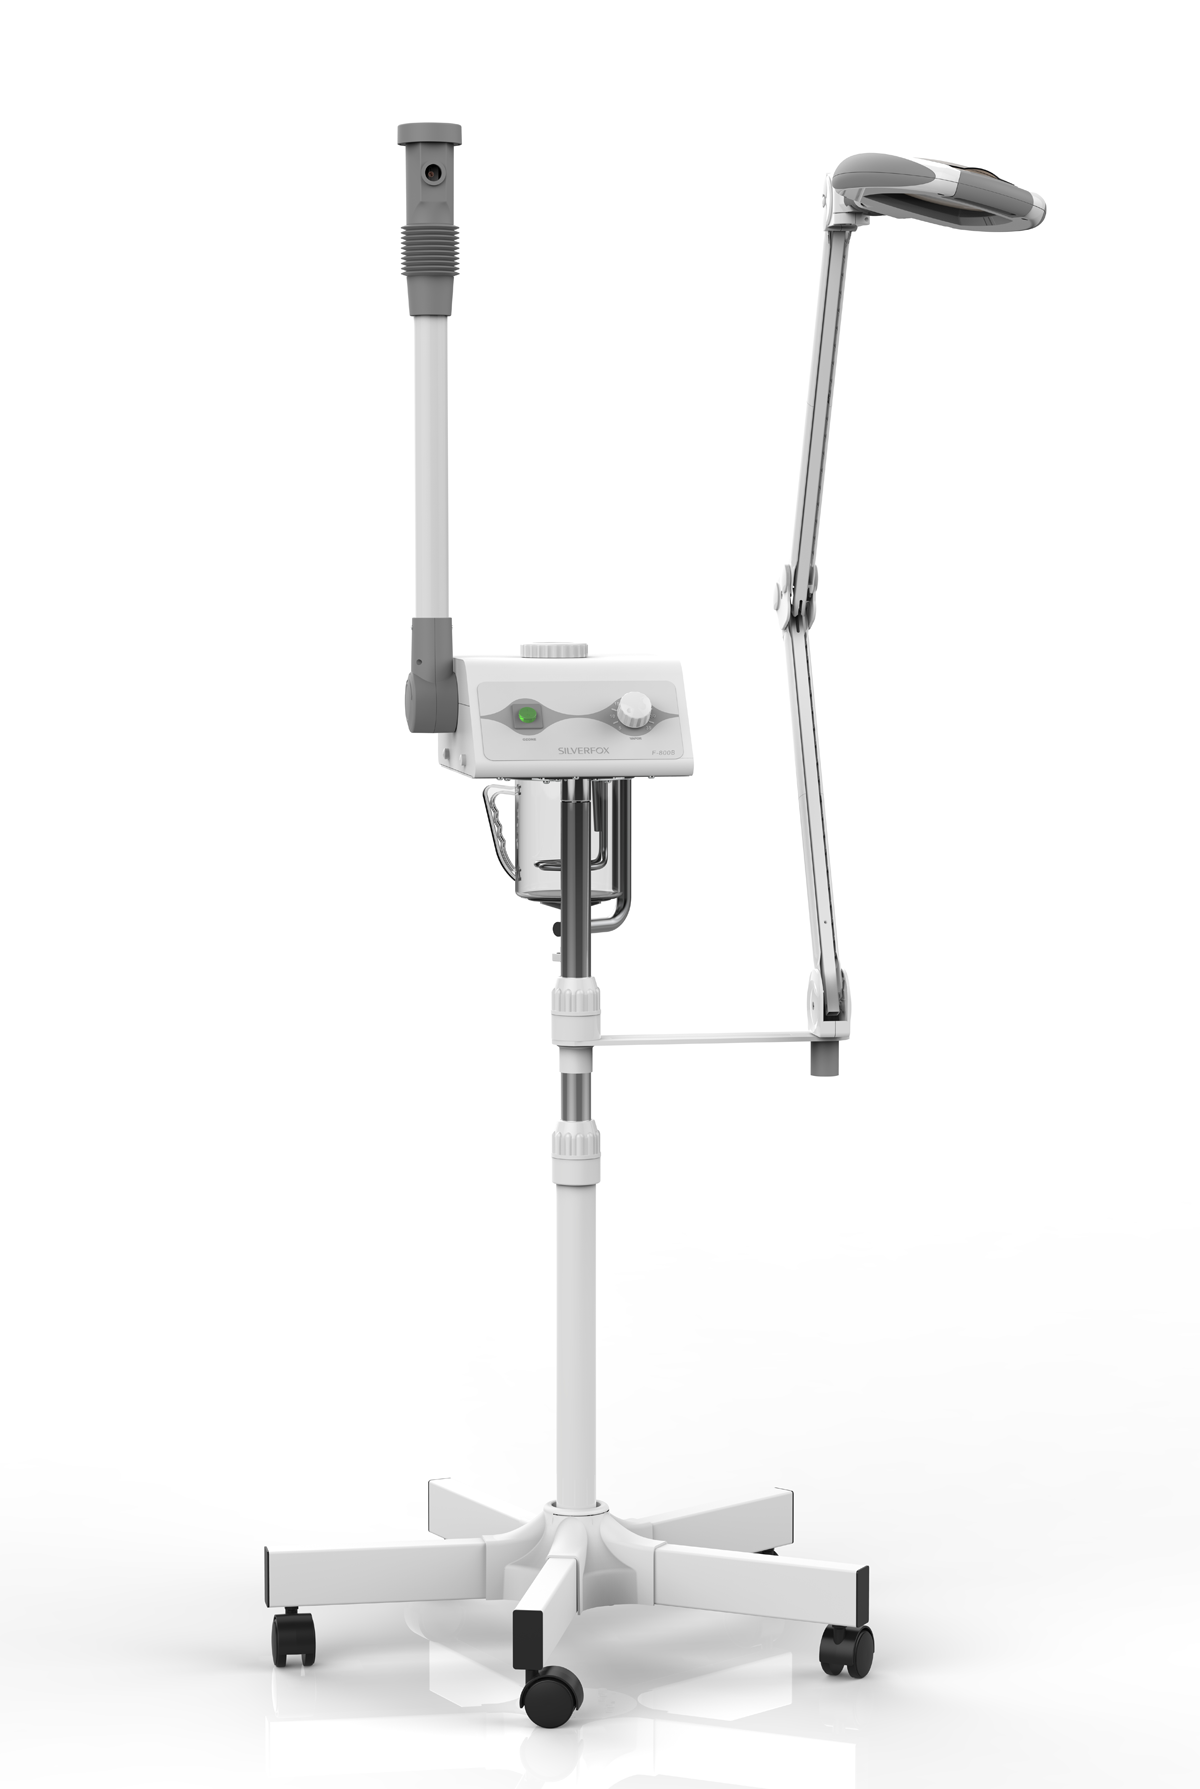 Silverfox facial steamer 800 with 1005 magnifying lamp